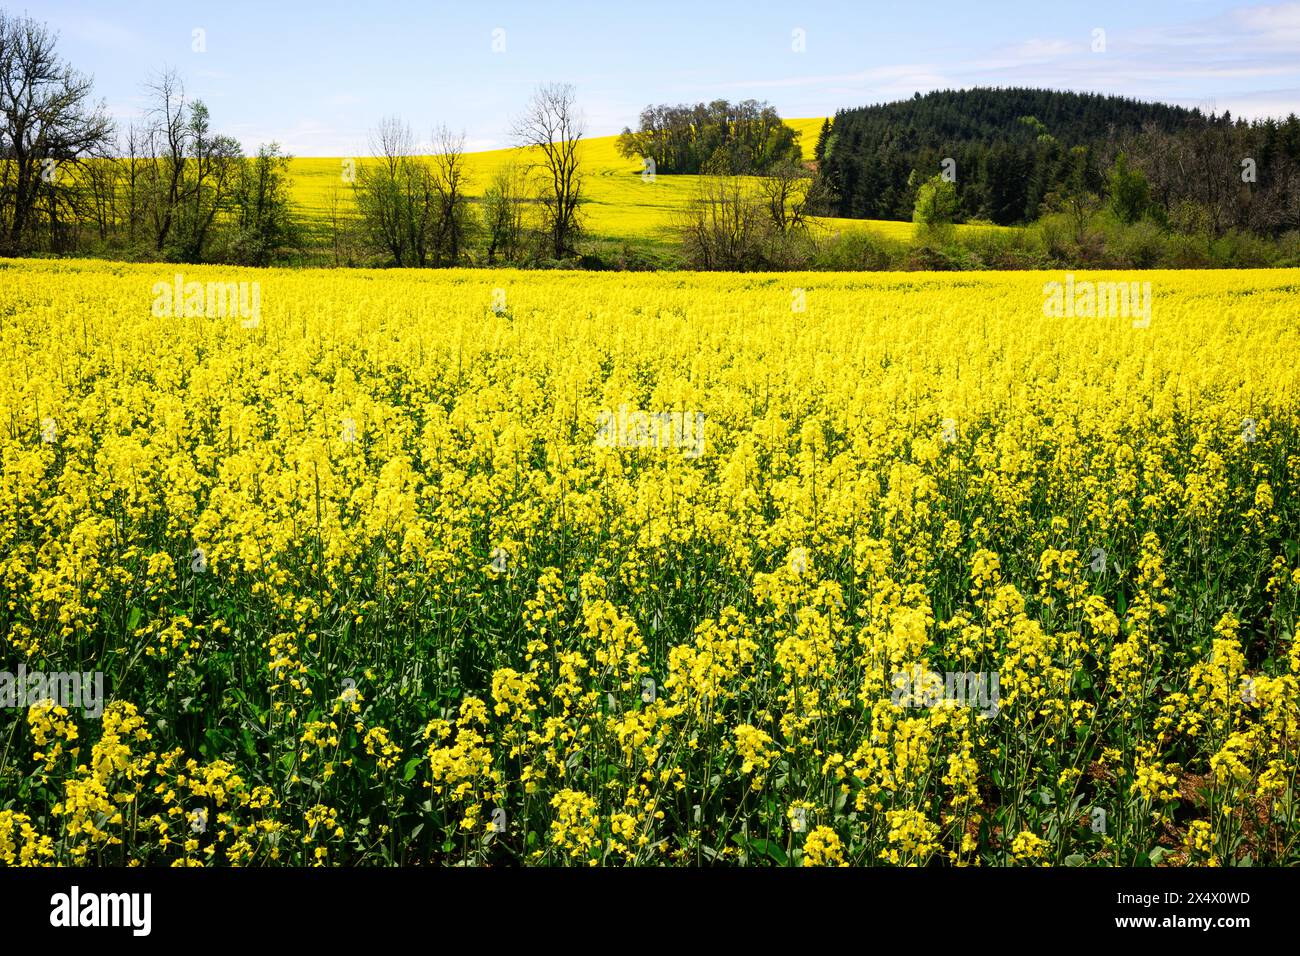 Field of yellow rapeseed brassica napus crop covering field and hillside Stock Photo